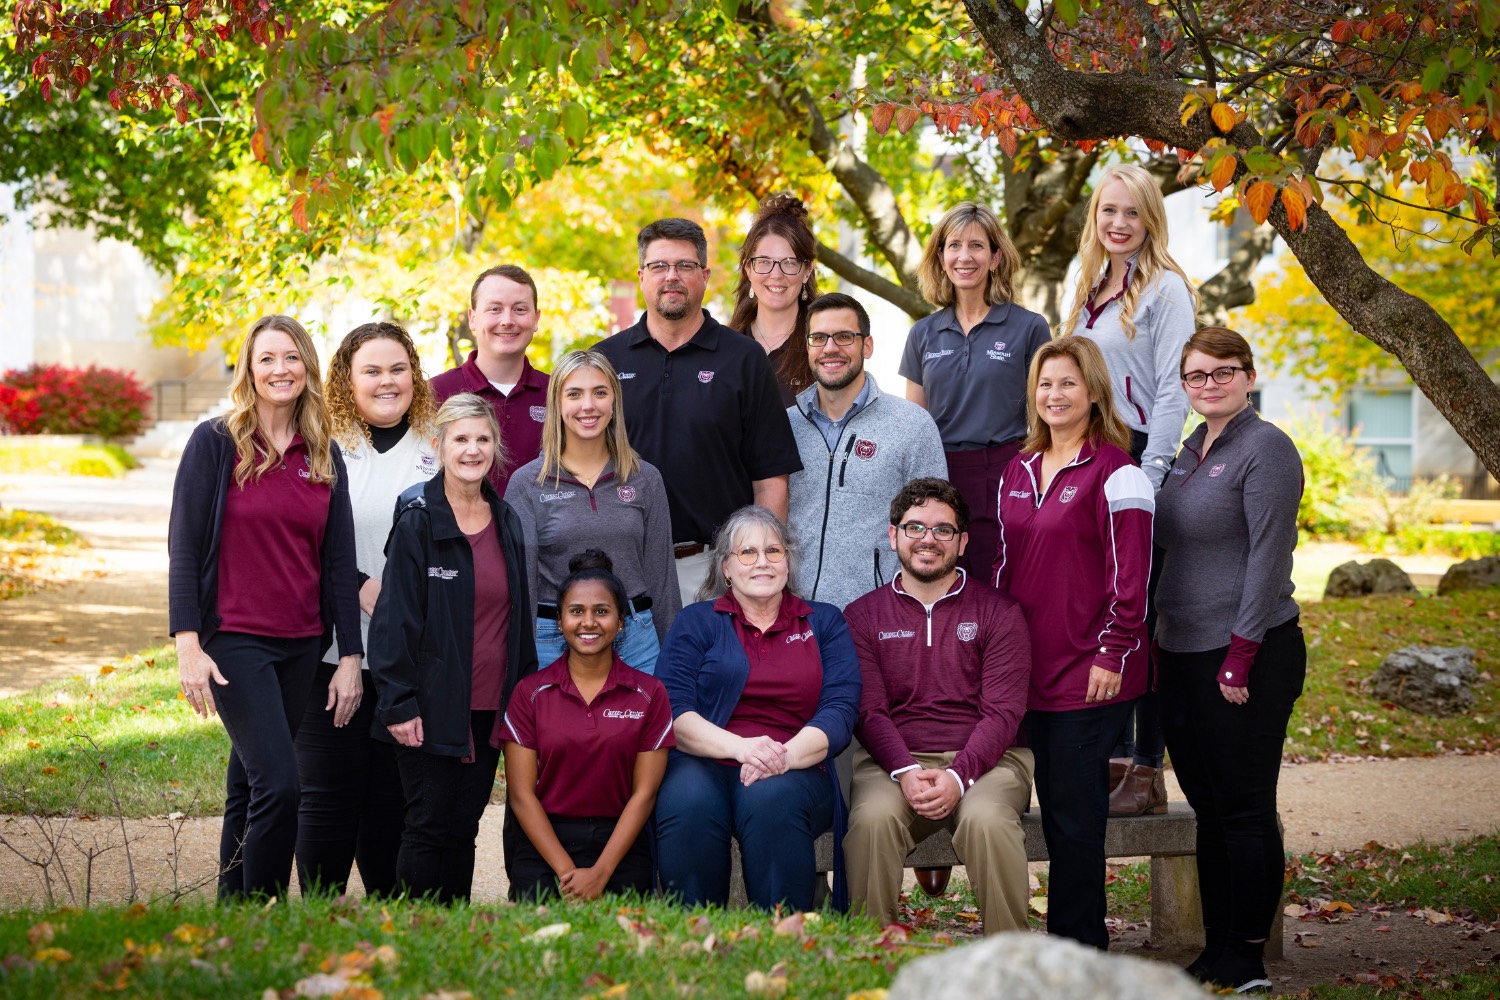 The Career Center staff gathers for a photo on an autumn day on the Missouri State University campus.